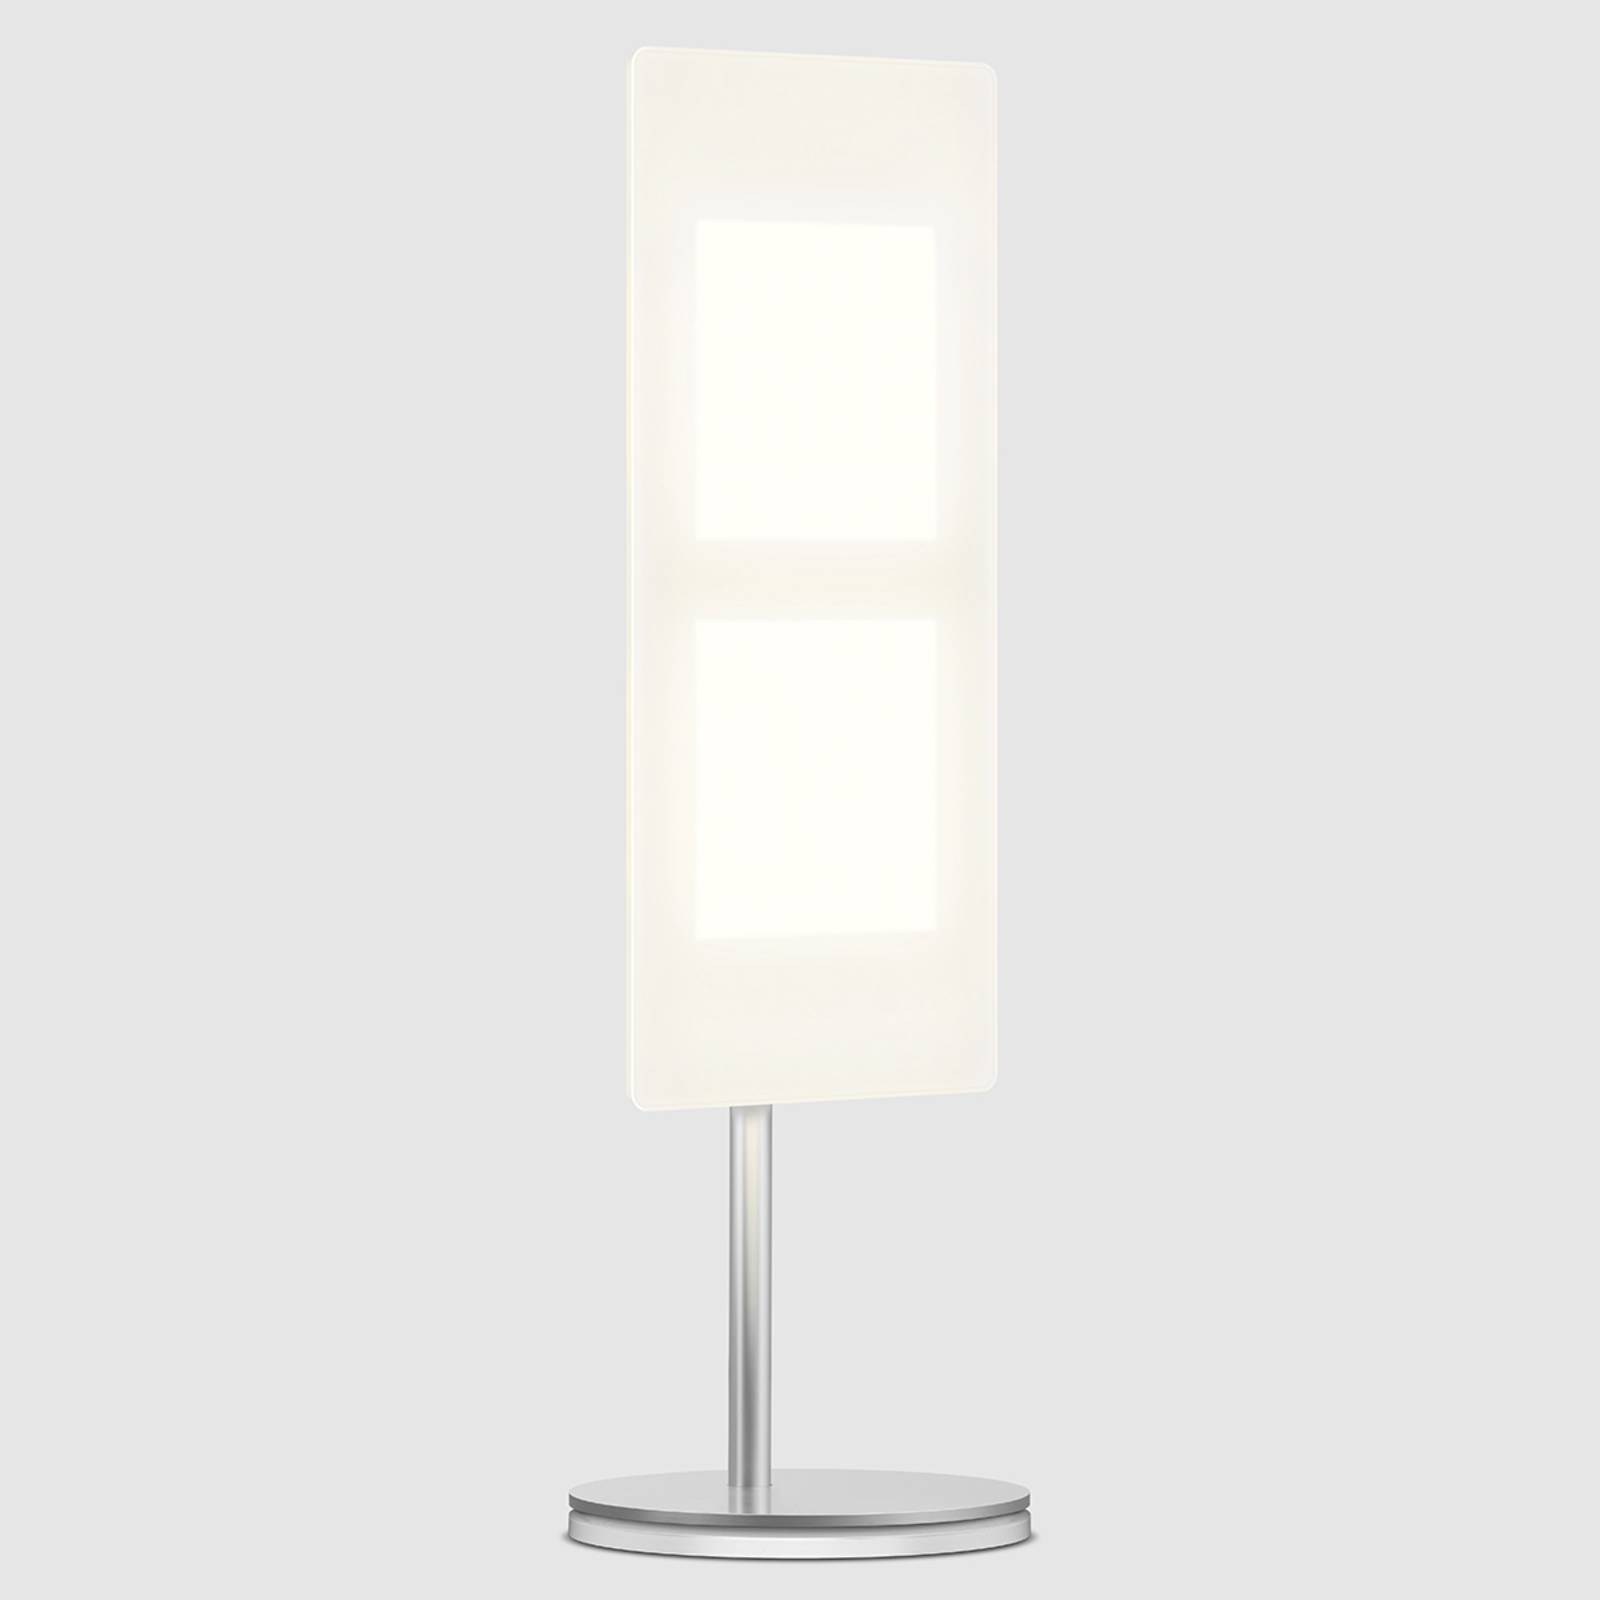 Image of 47,8 cm lampe à poser OLED OMLED One t2, blanc 4260744970205